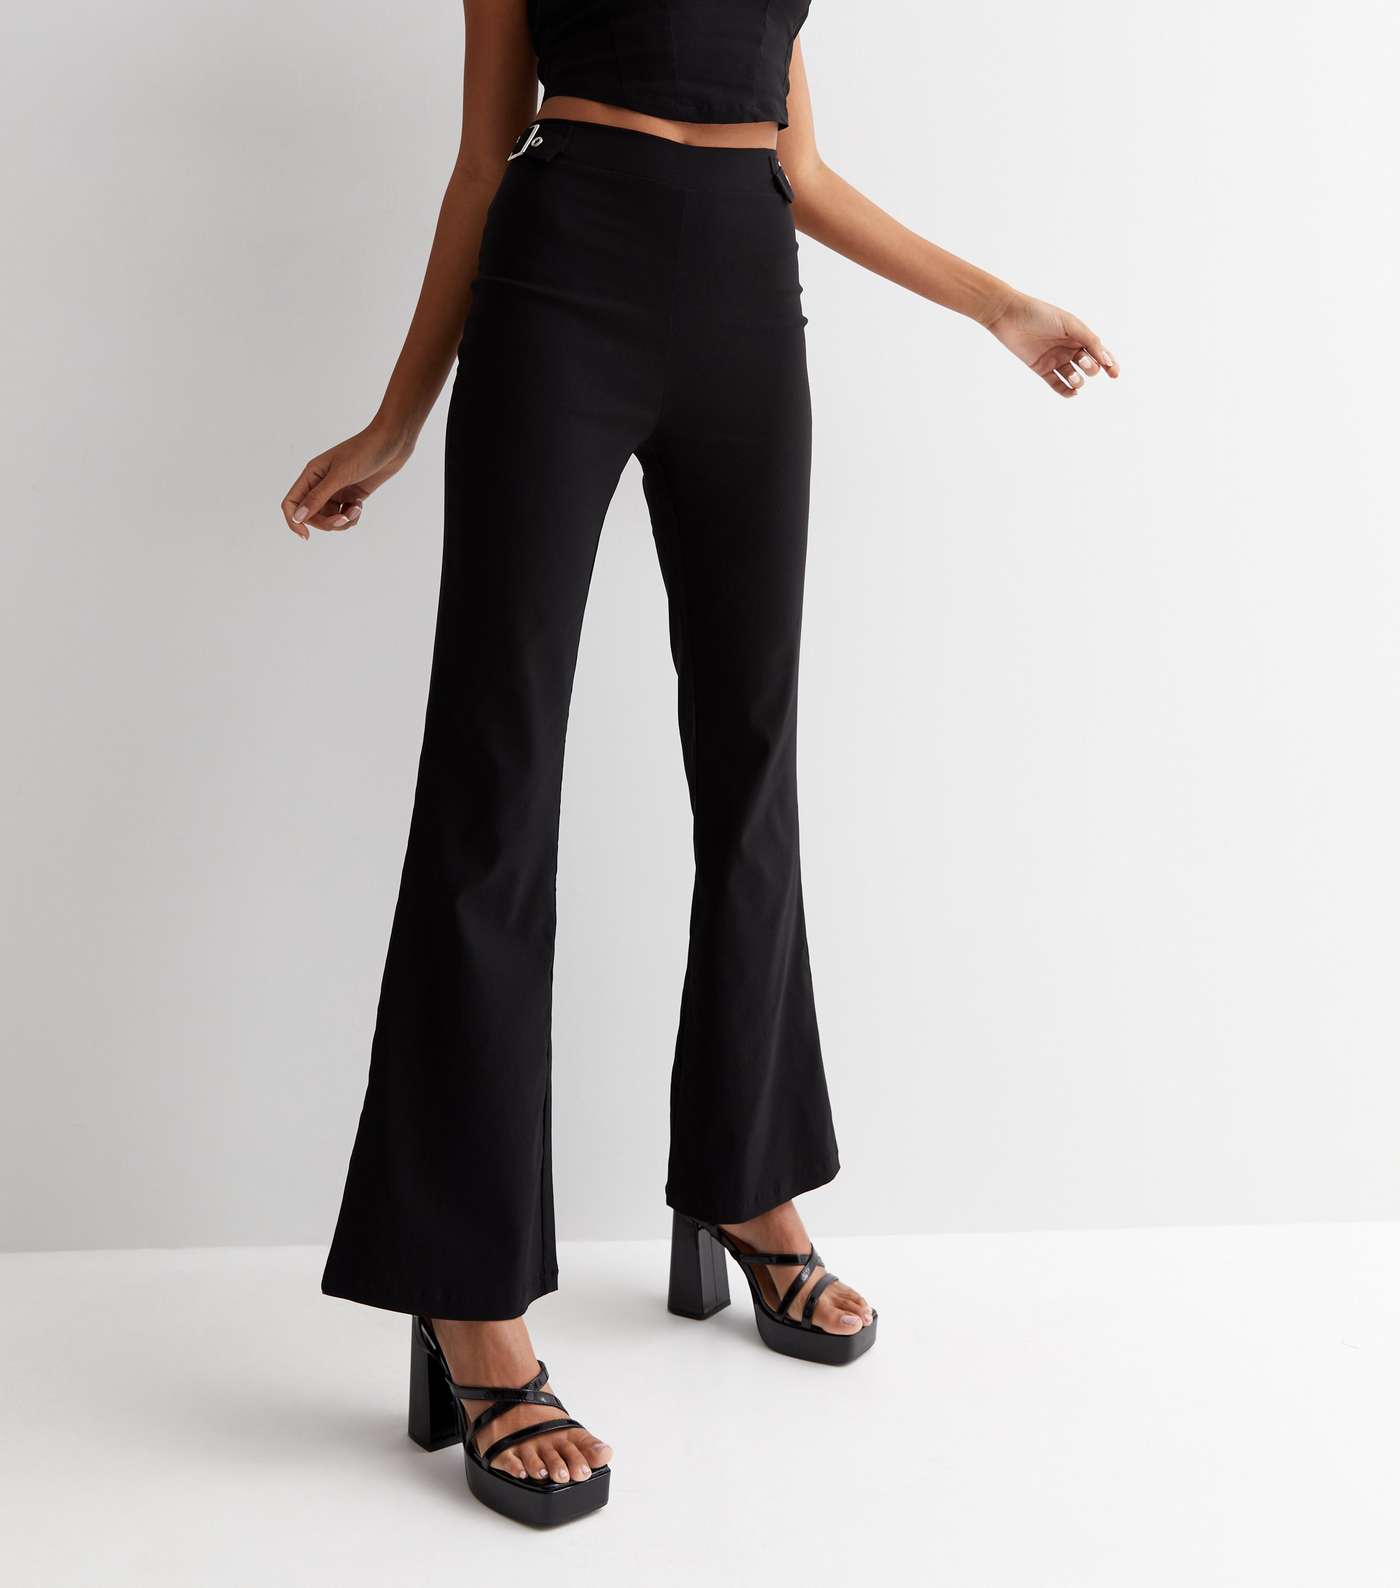 Cameo Rose Black Buckle Wide Leg Trousers Image 2